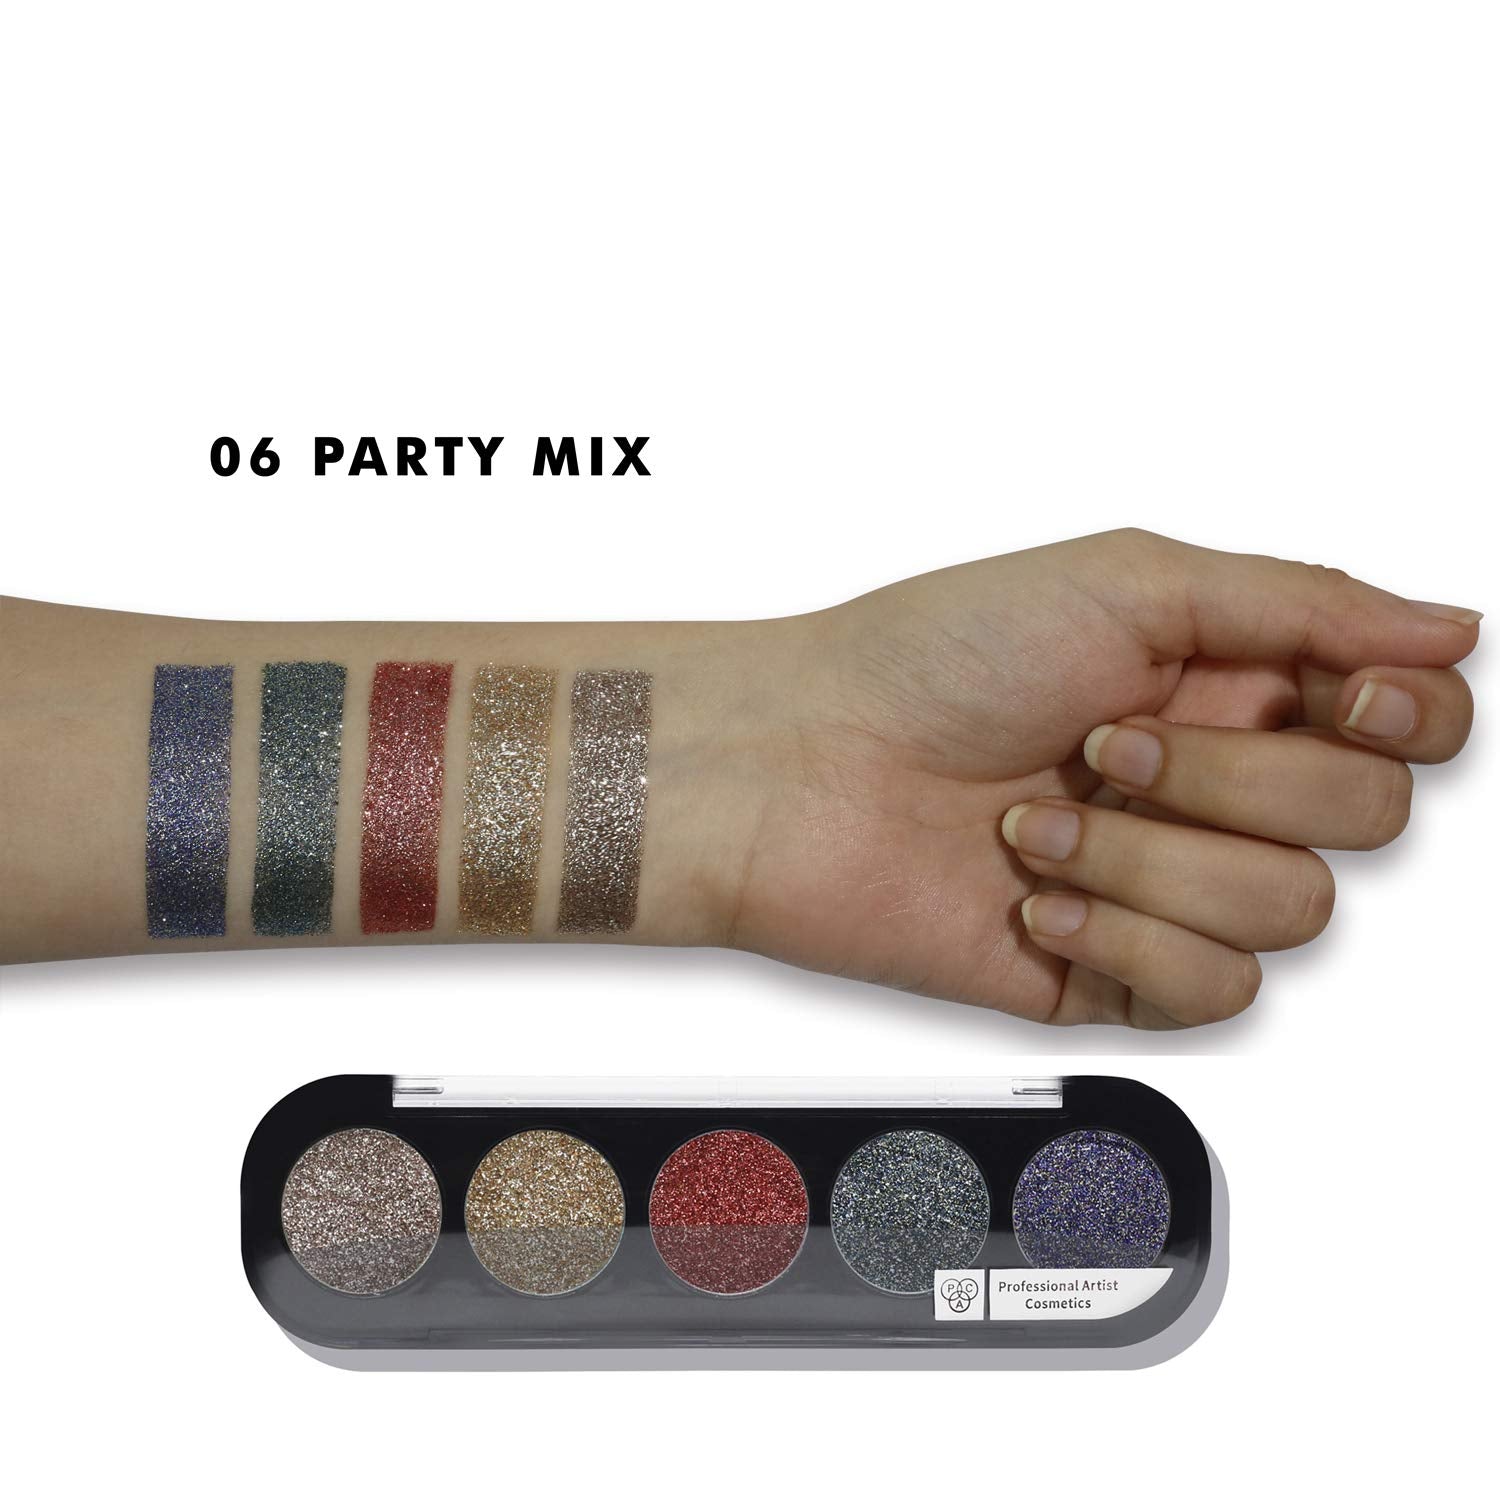 PAC Glitter Eyeshadow X5 - 06 (Party Mix) PAC